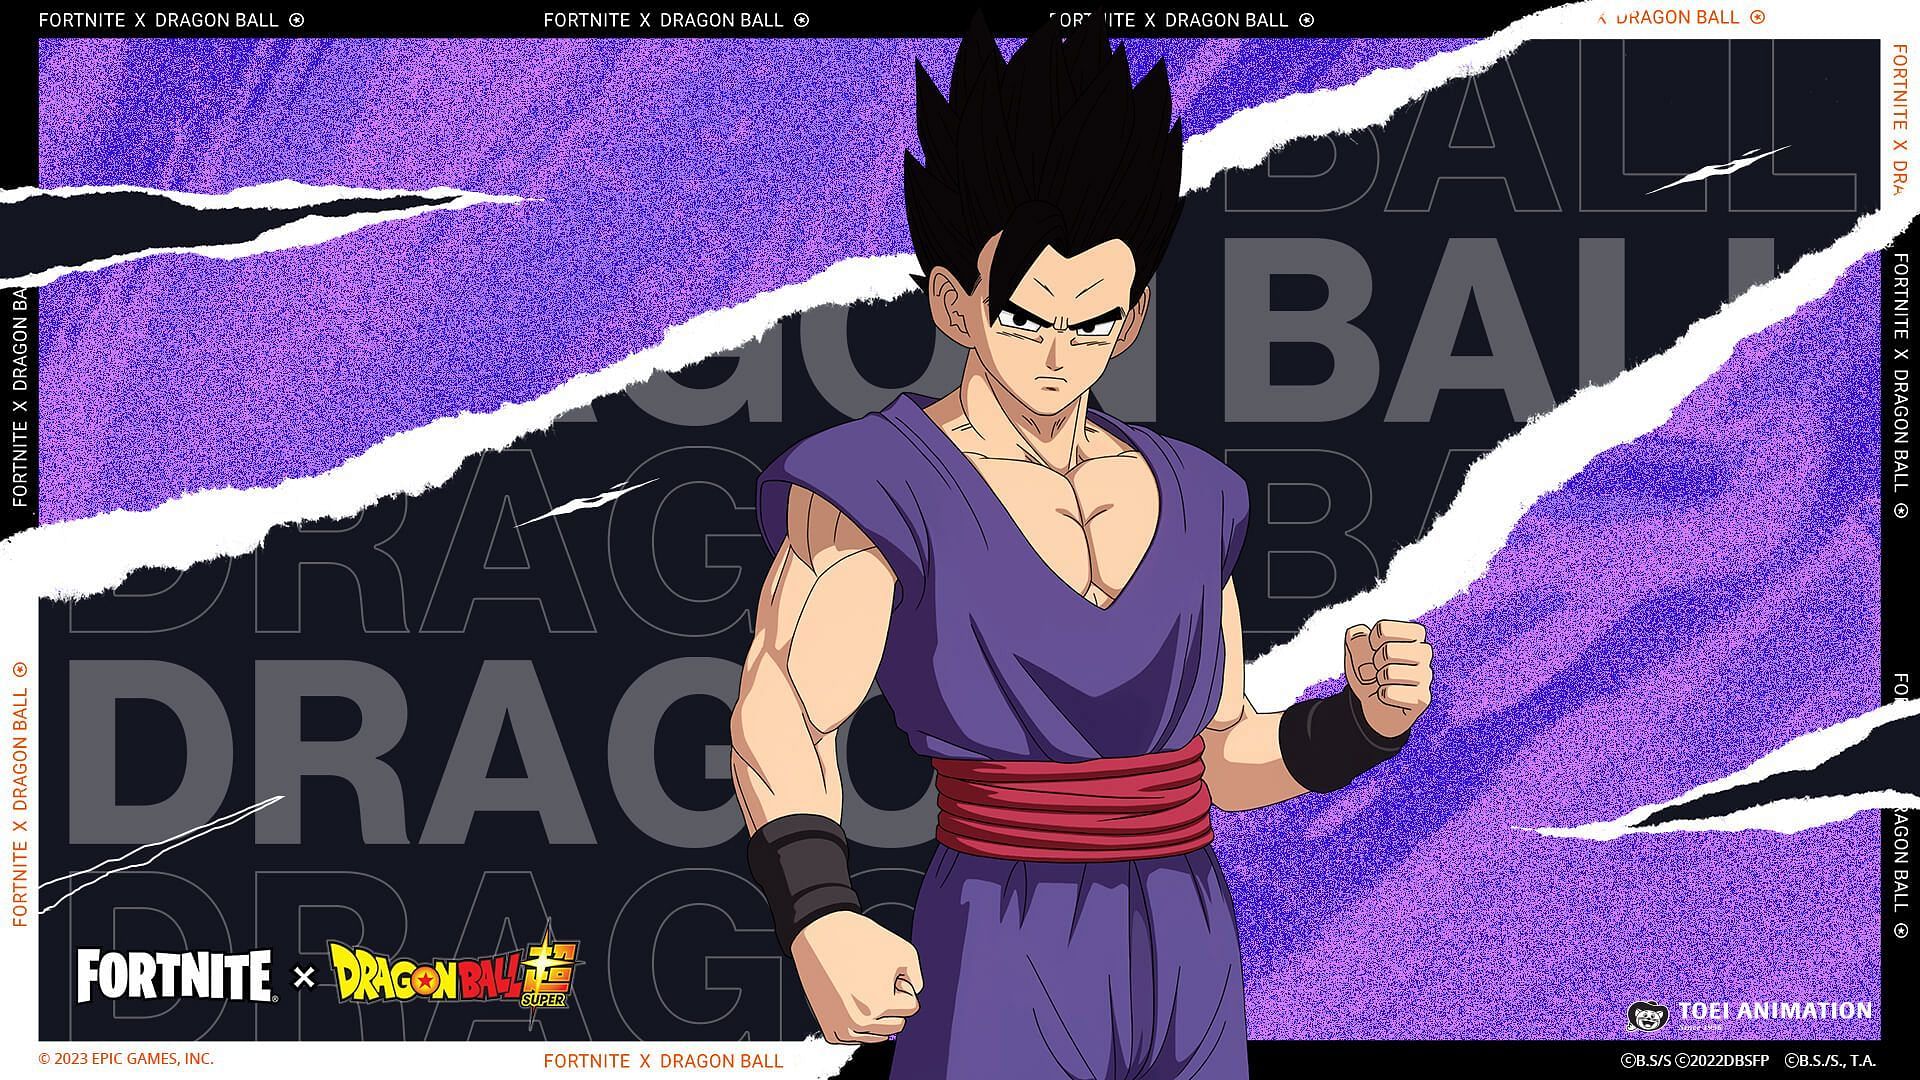 Son Gohan is another popular anime character (Image via Epic Games)